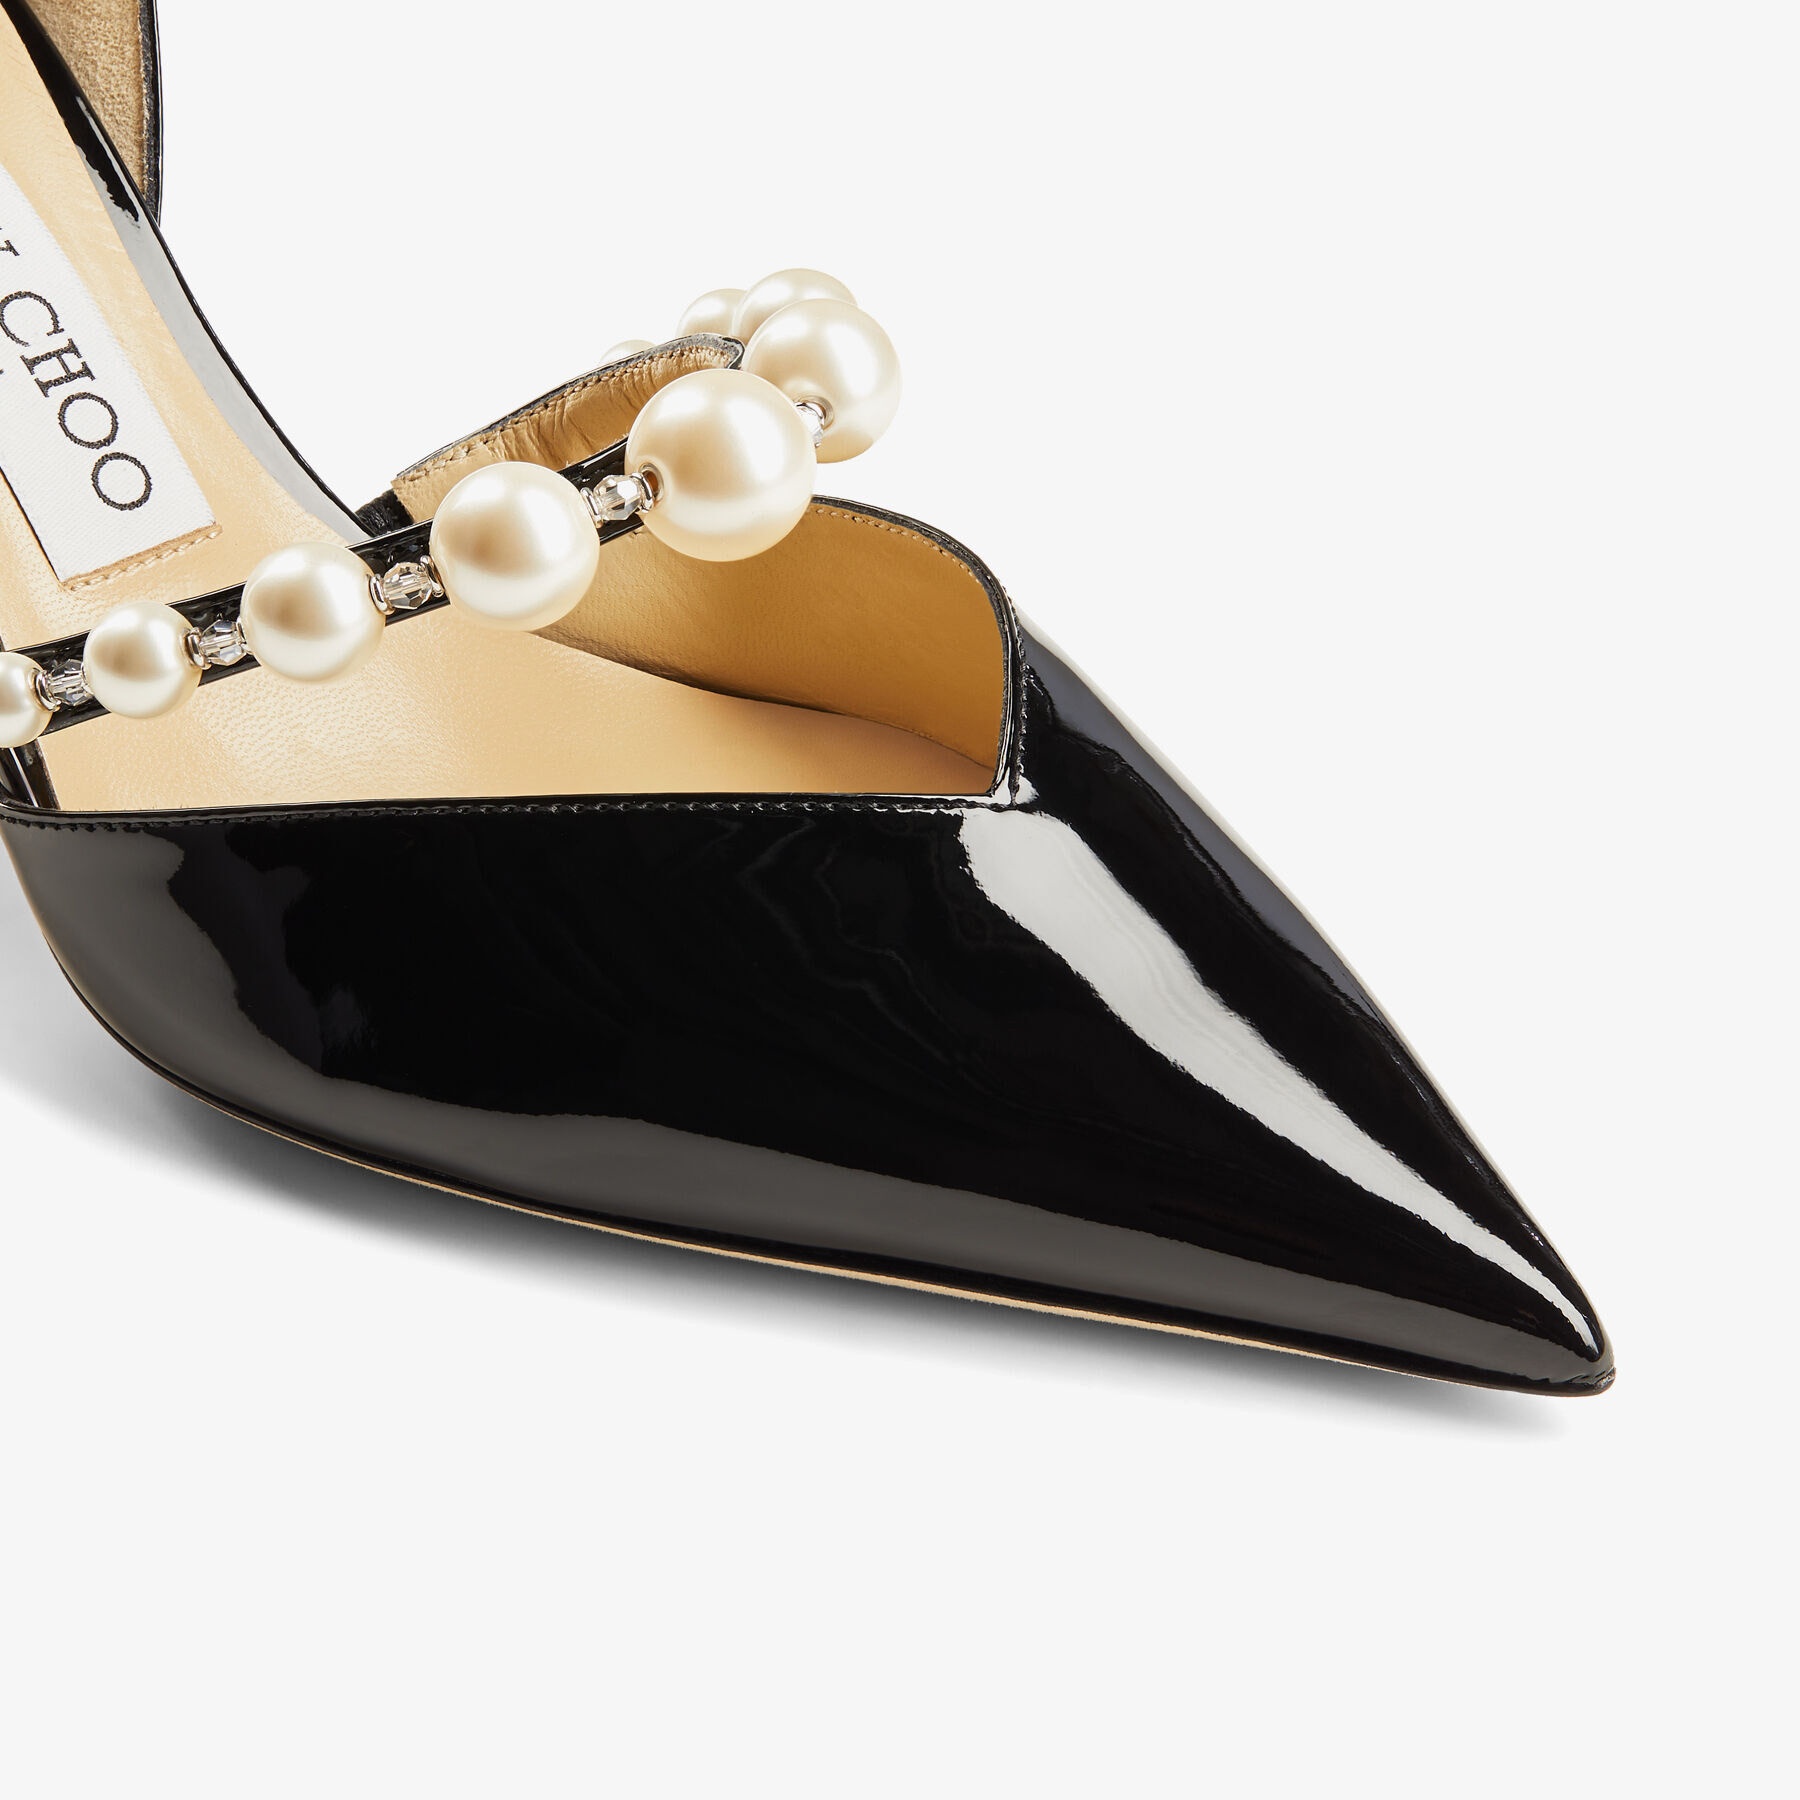 Aurelie 65
Black Patent Leather Pointed Pumps with Pearl Embellishment - 4